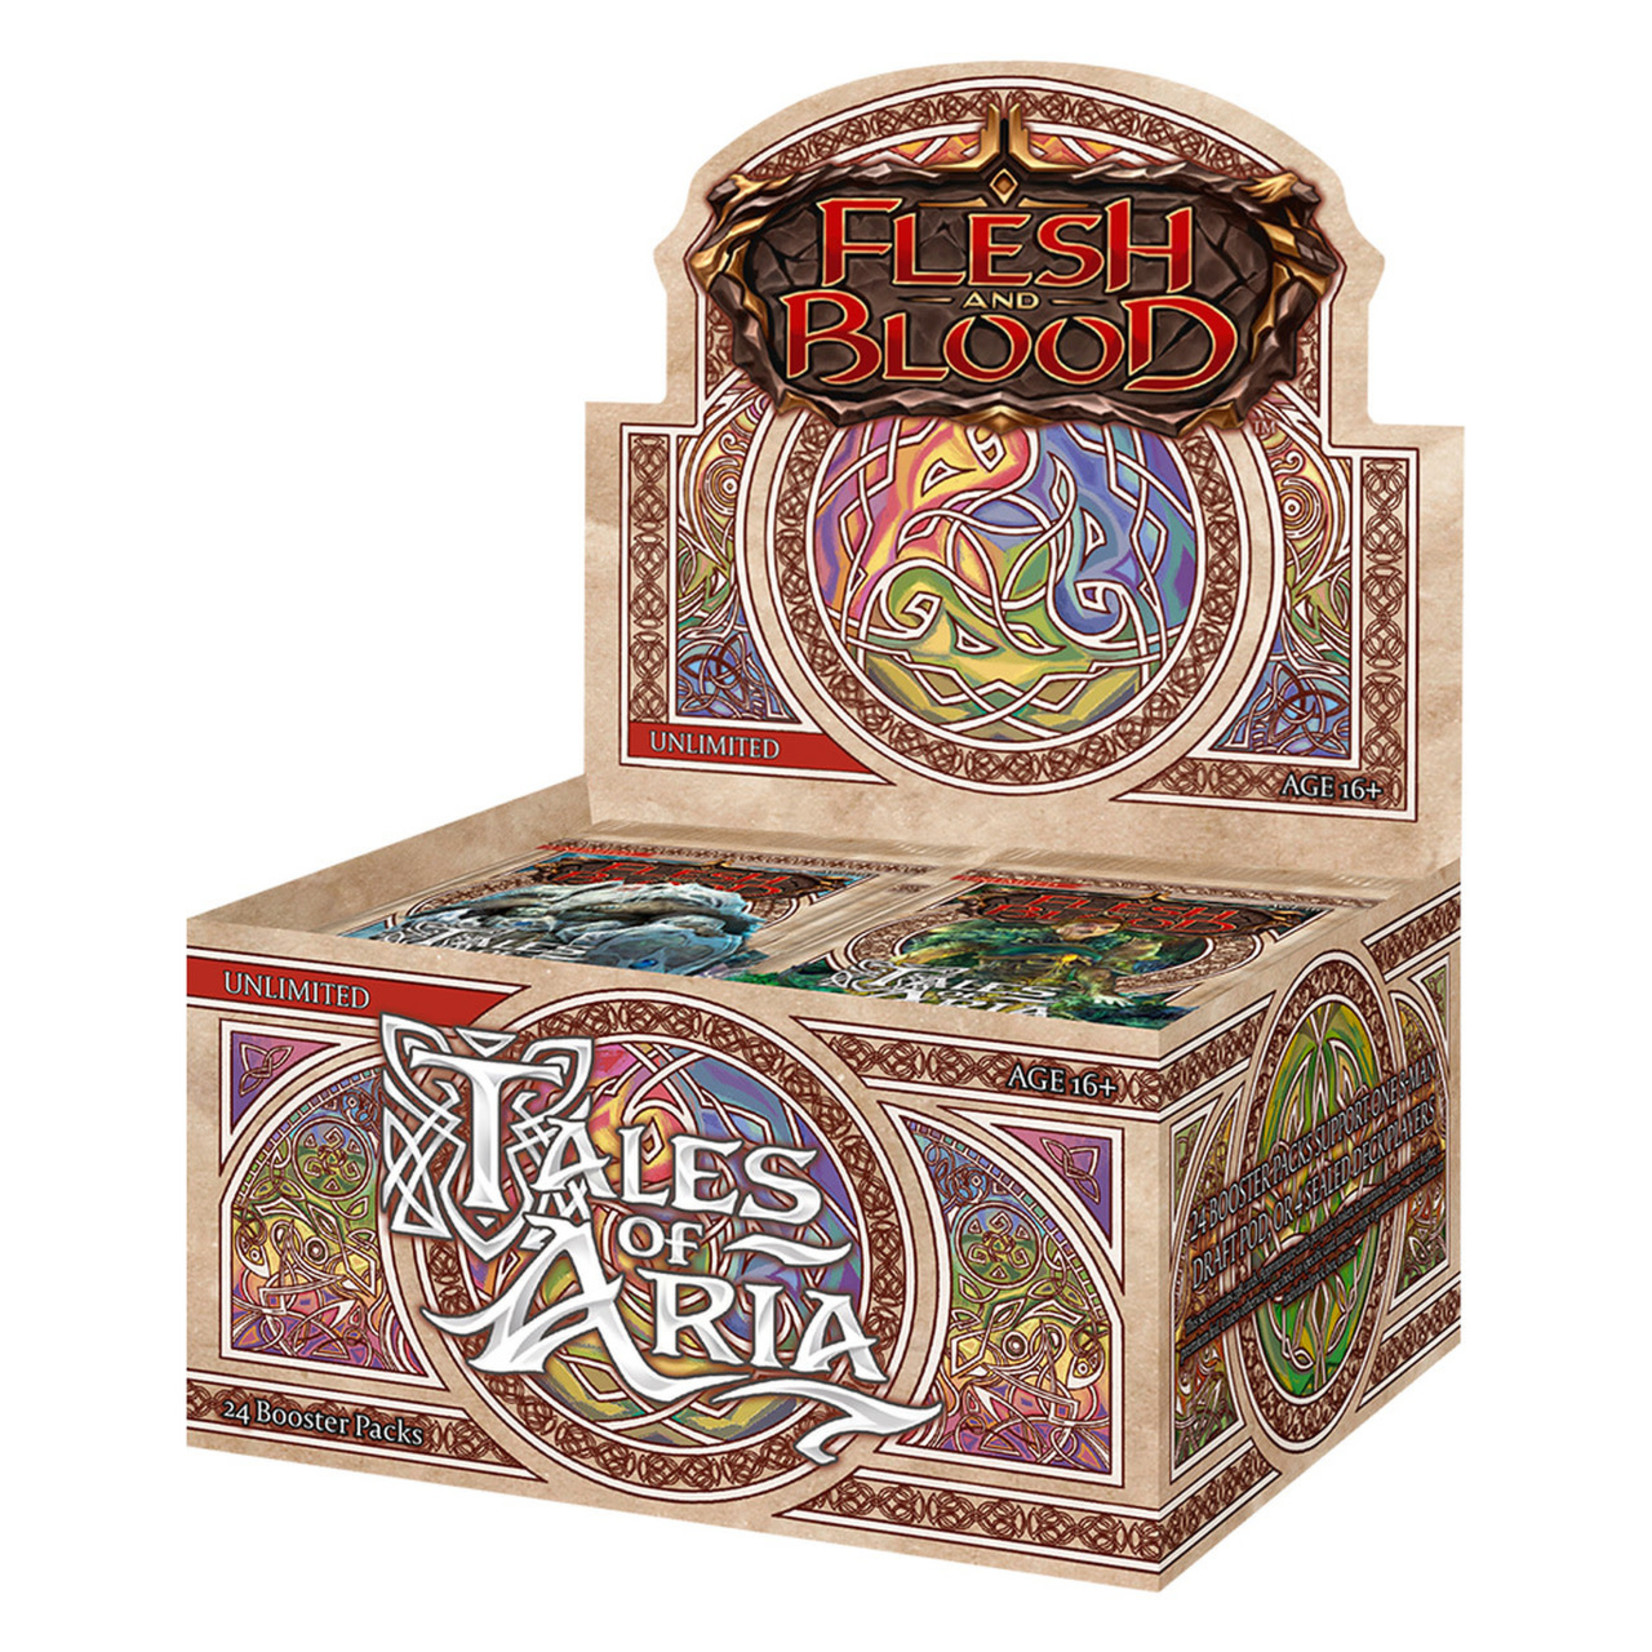 Legend Story Studios Flesh and Blood Tales of Aria Unlimited Booster Box